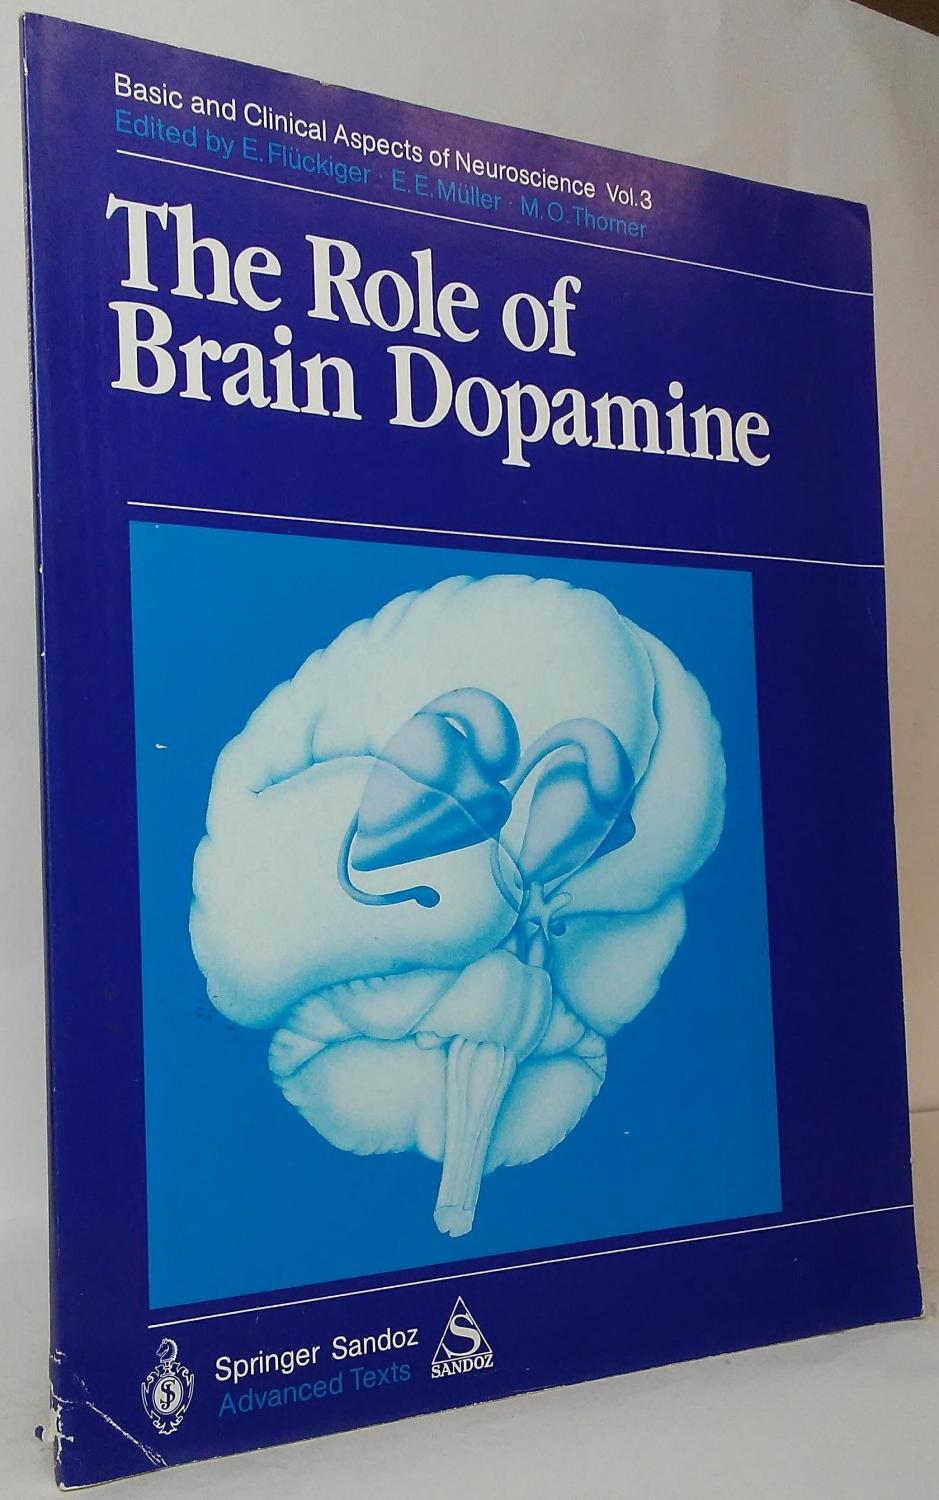 The Role of Brain Dopamine (Basic and Clinical Aspects of Neurosicience Vol. 3) - Fluckiger, E.; Muller, E.E.; & Thorner, M.O. (Editors)